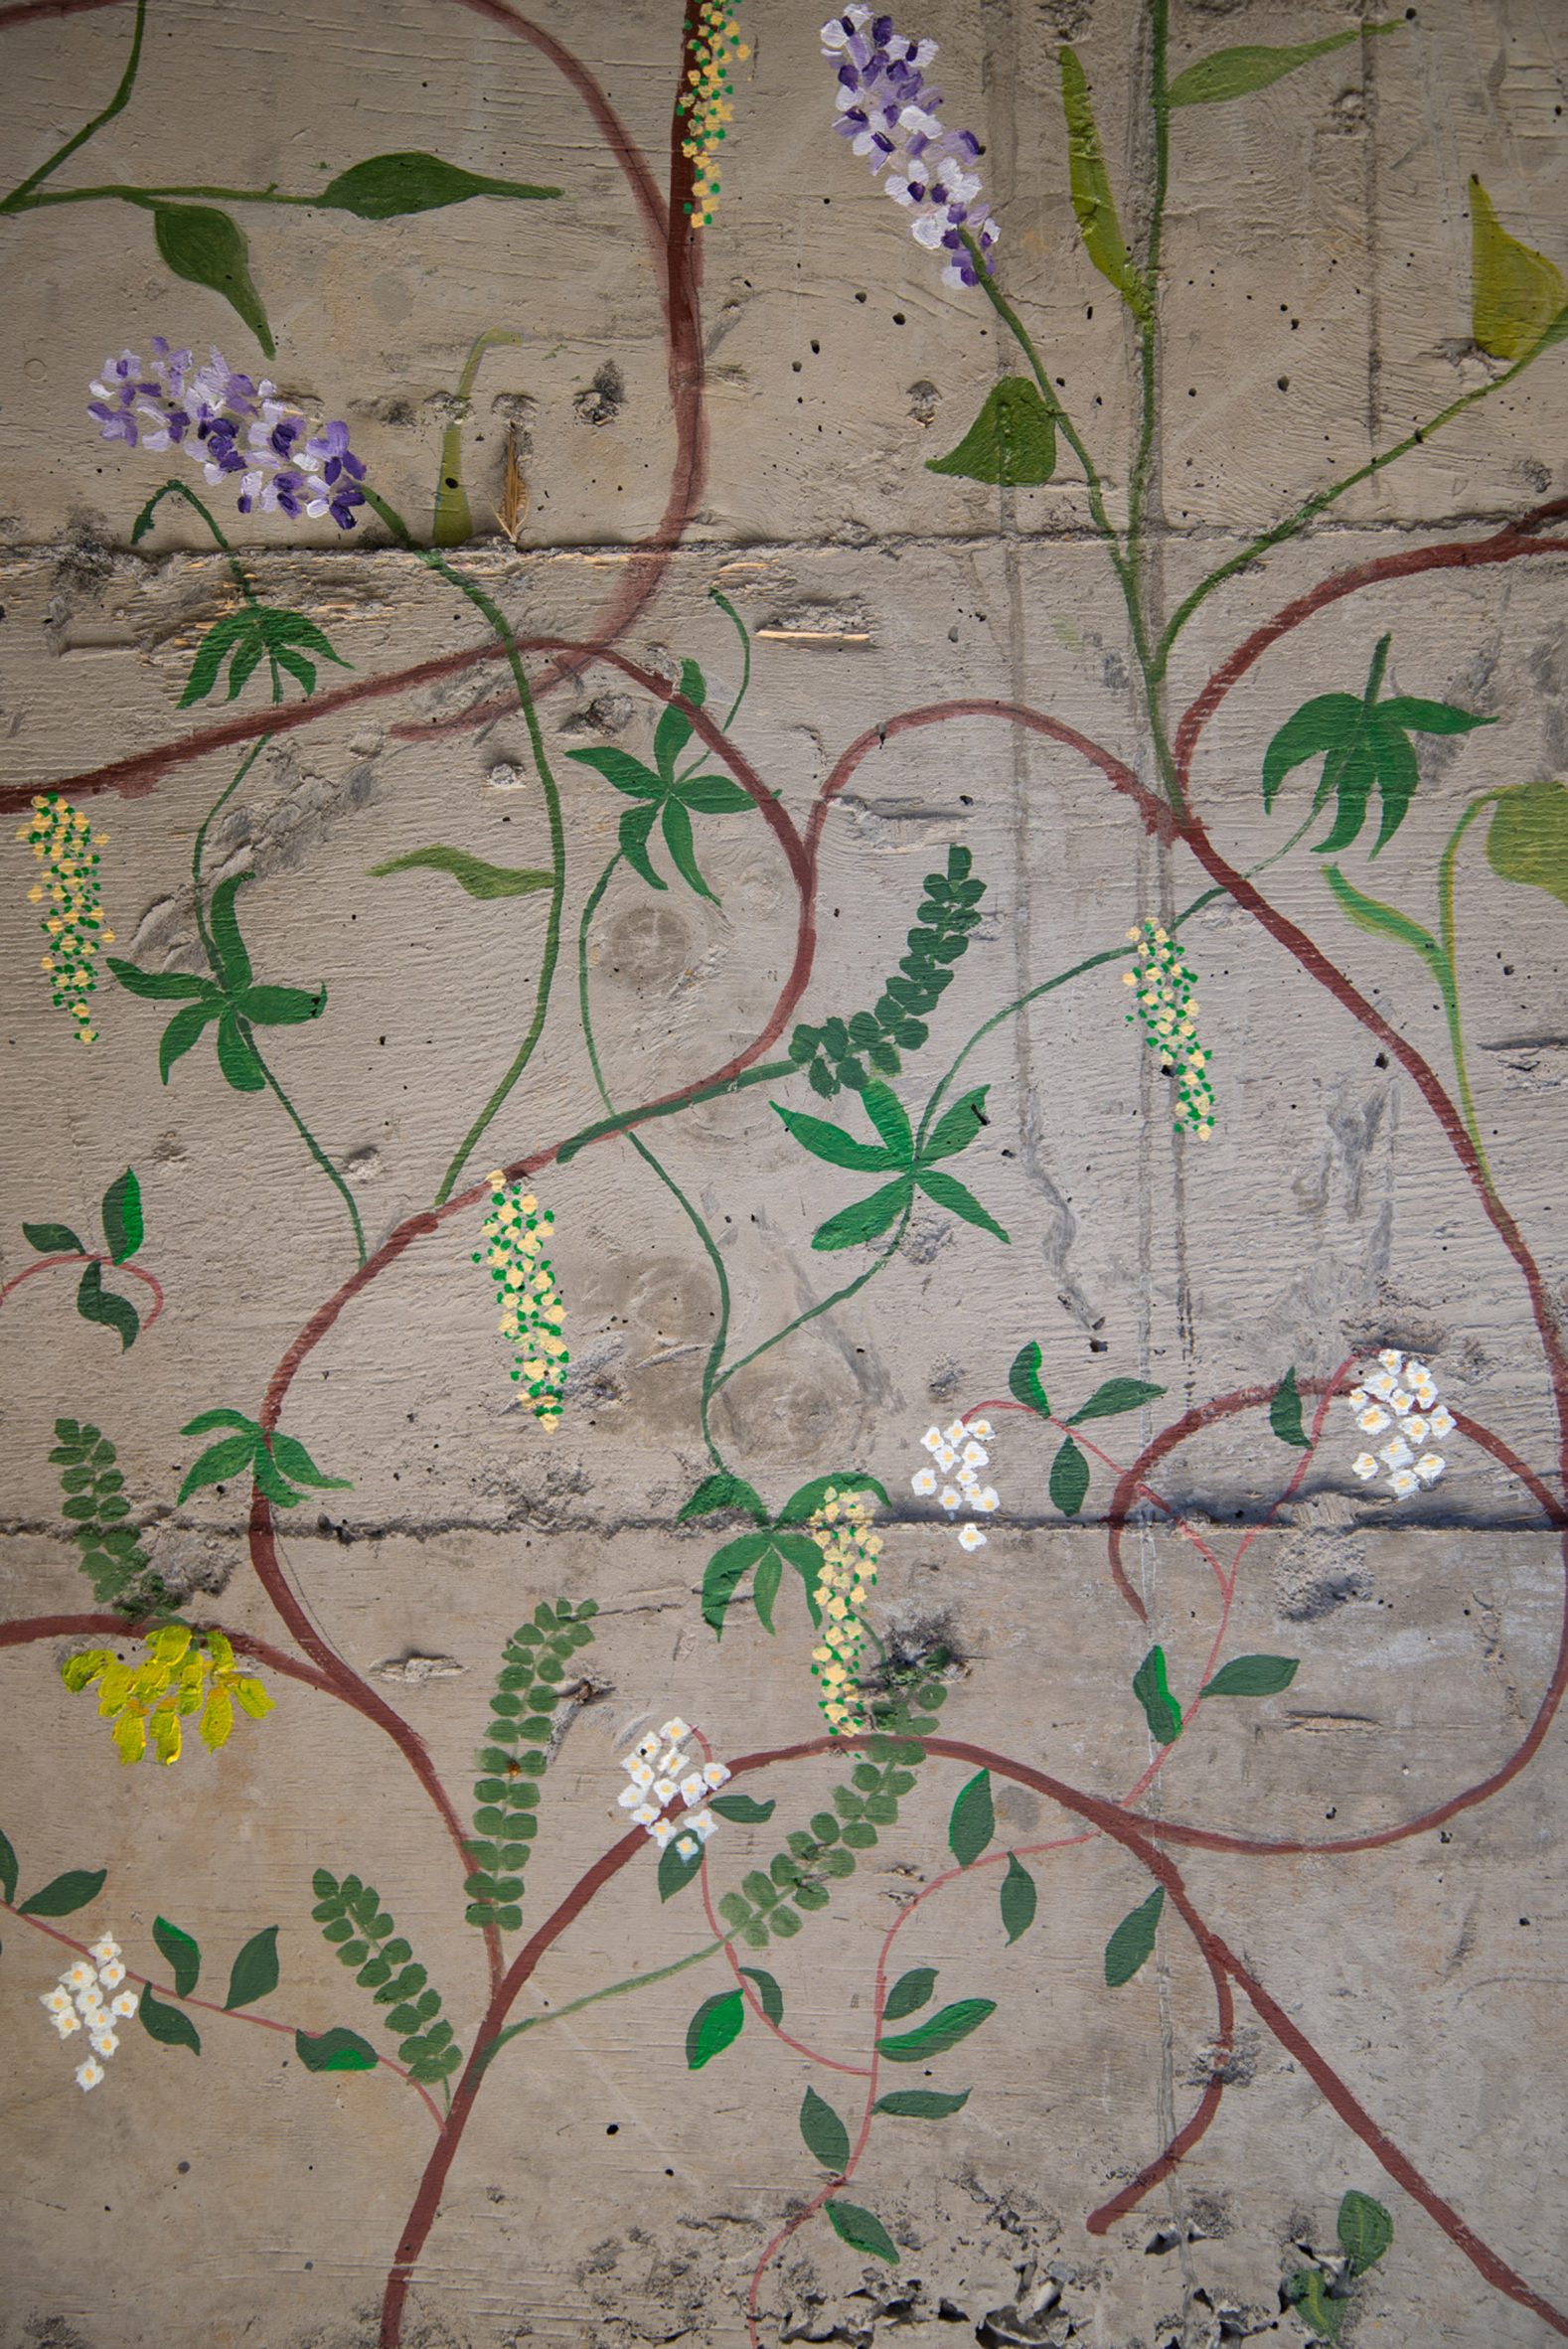 Painted flowers on concrete